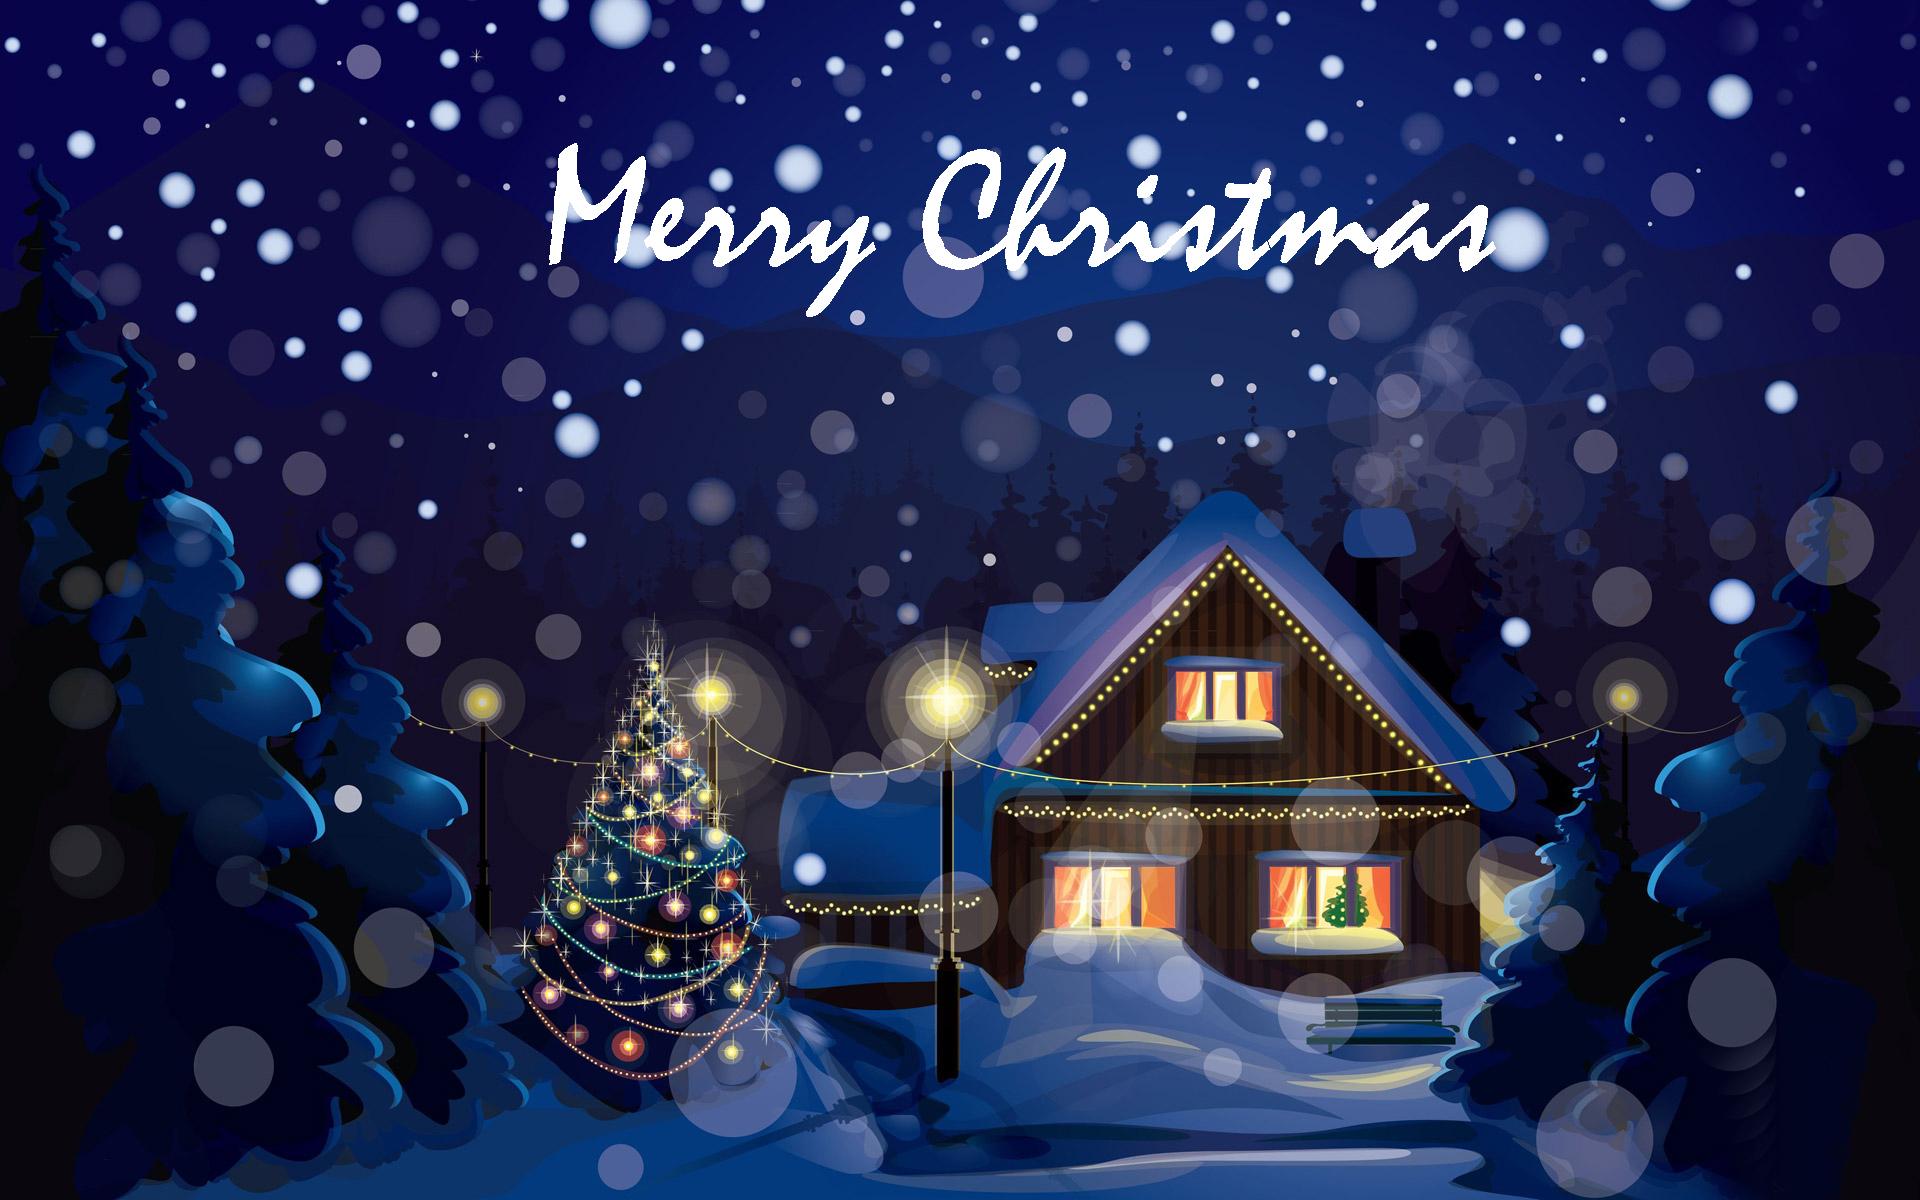 Free download Merry Christmas Wallpaper Picture Image